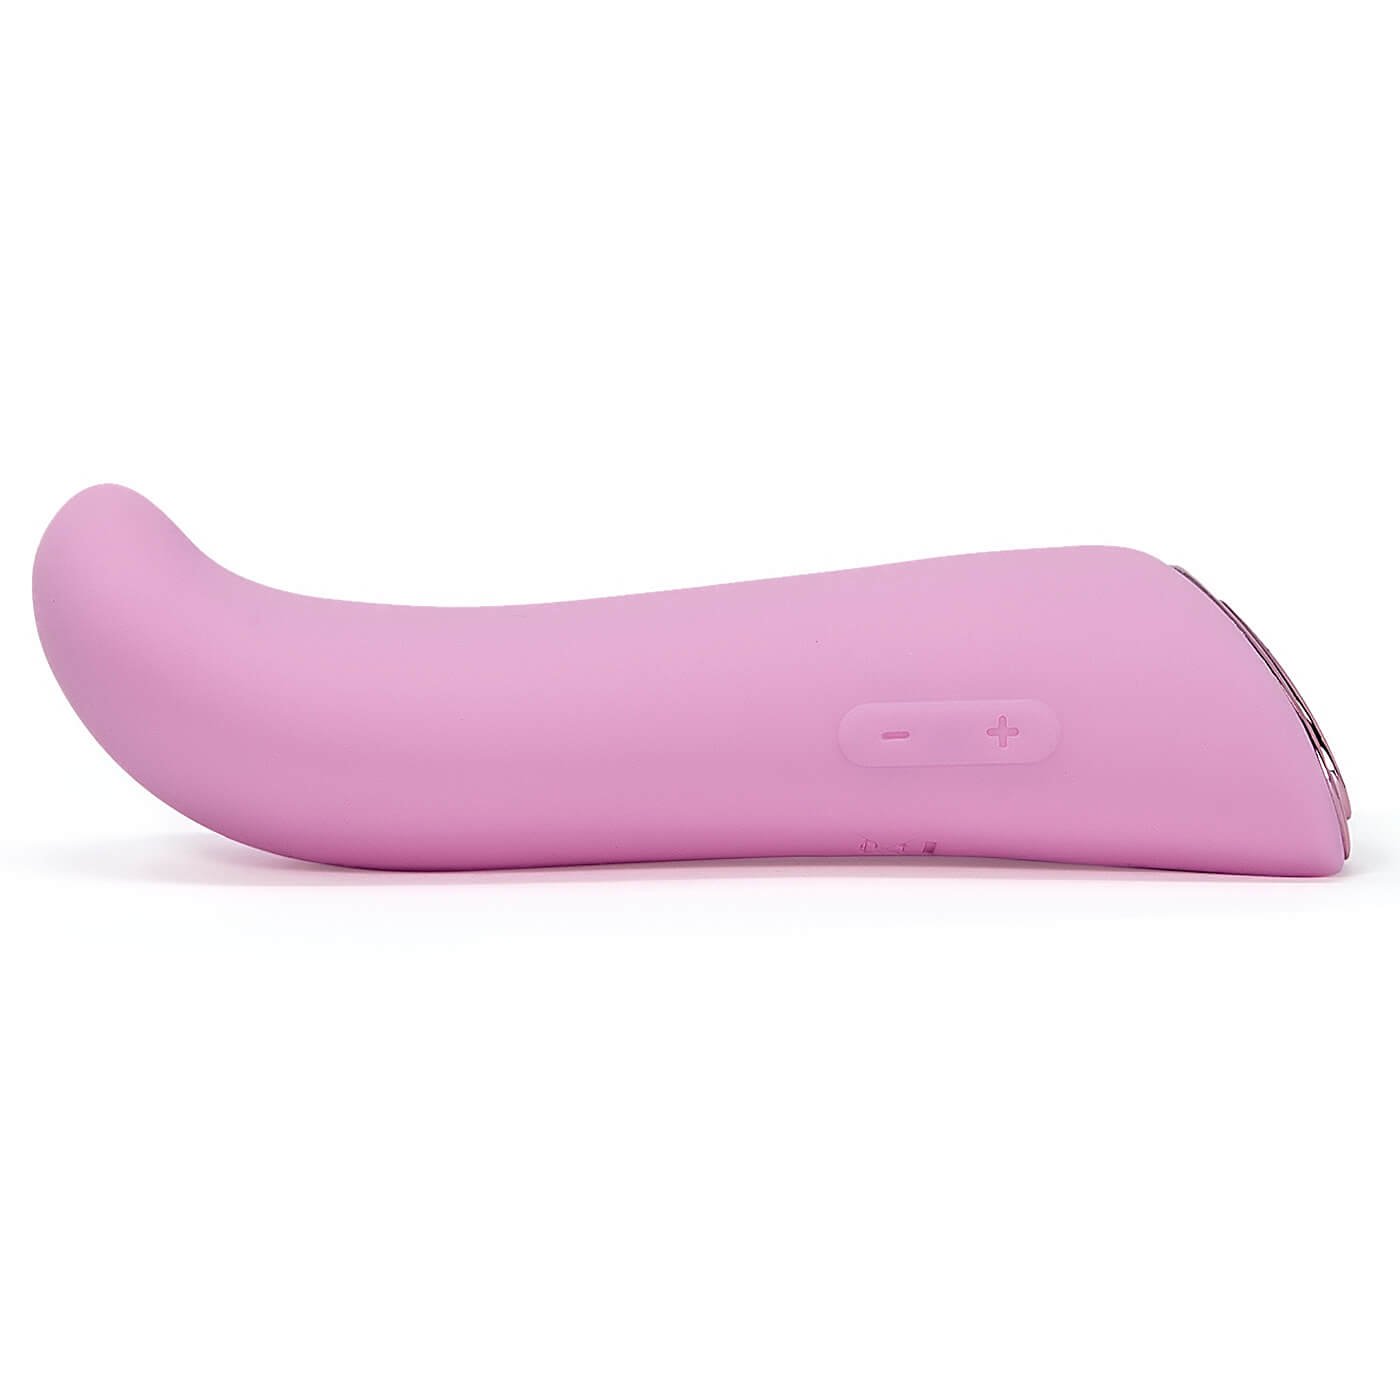 Jopen Amour Mini G 5 Speed USB Rechargeable Silicone G-Spot Vibrator